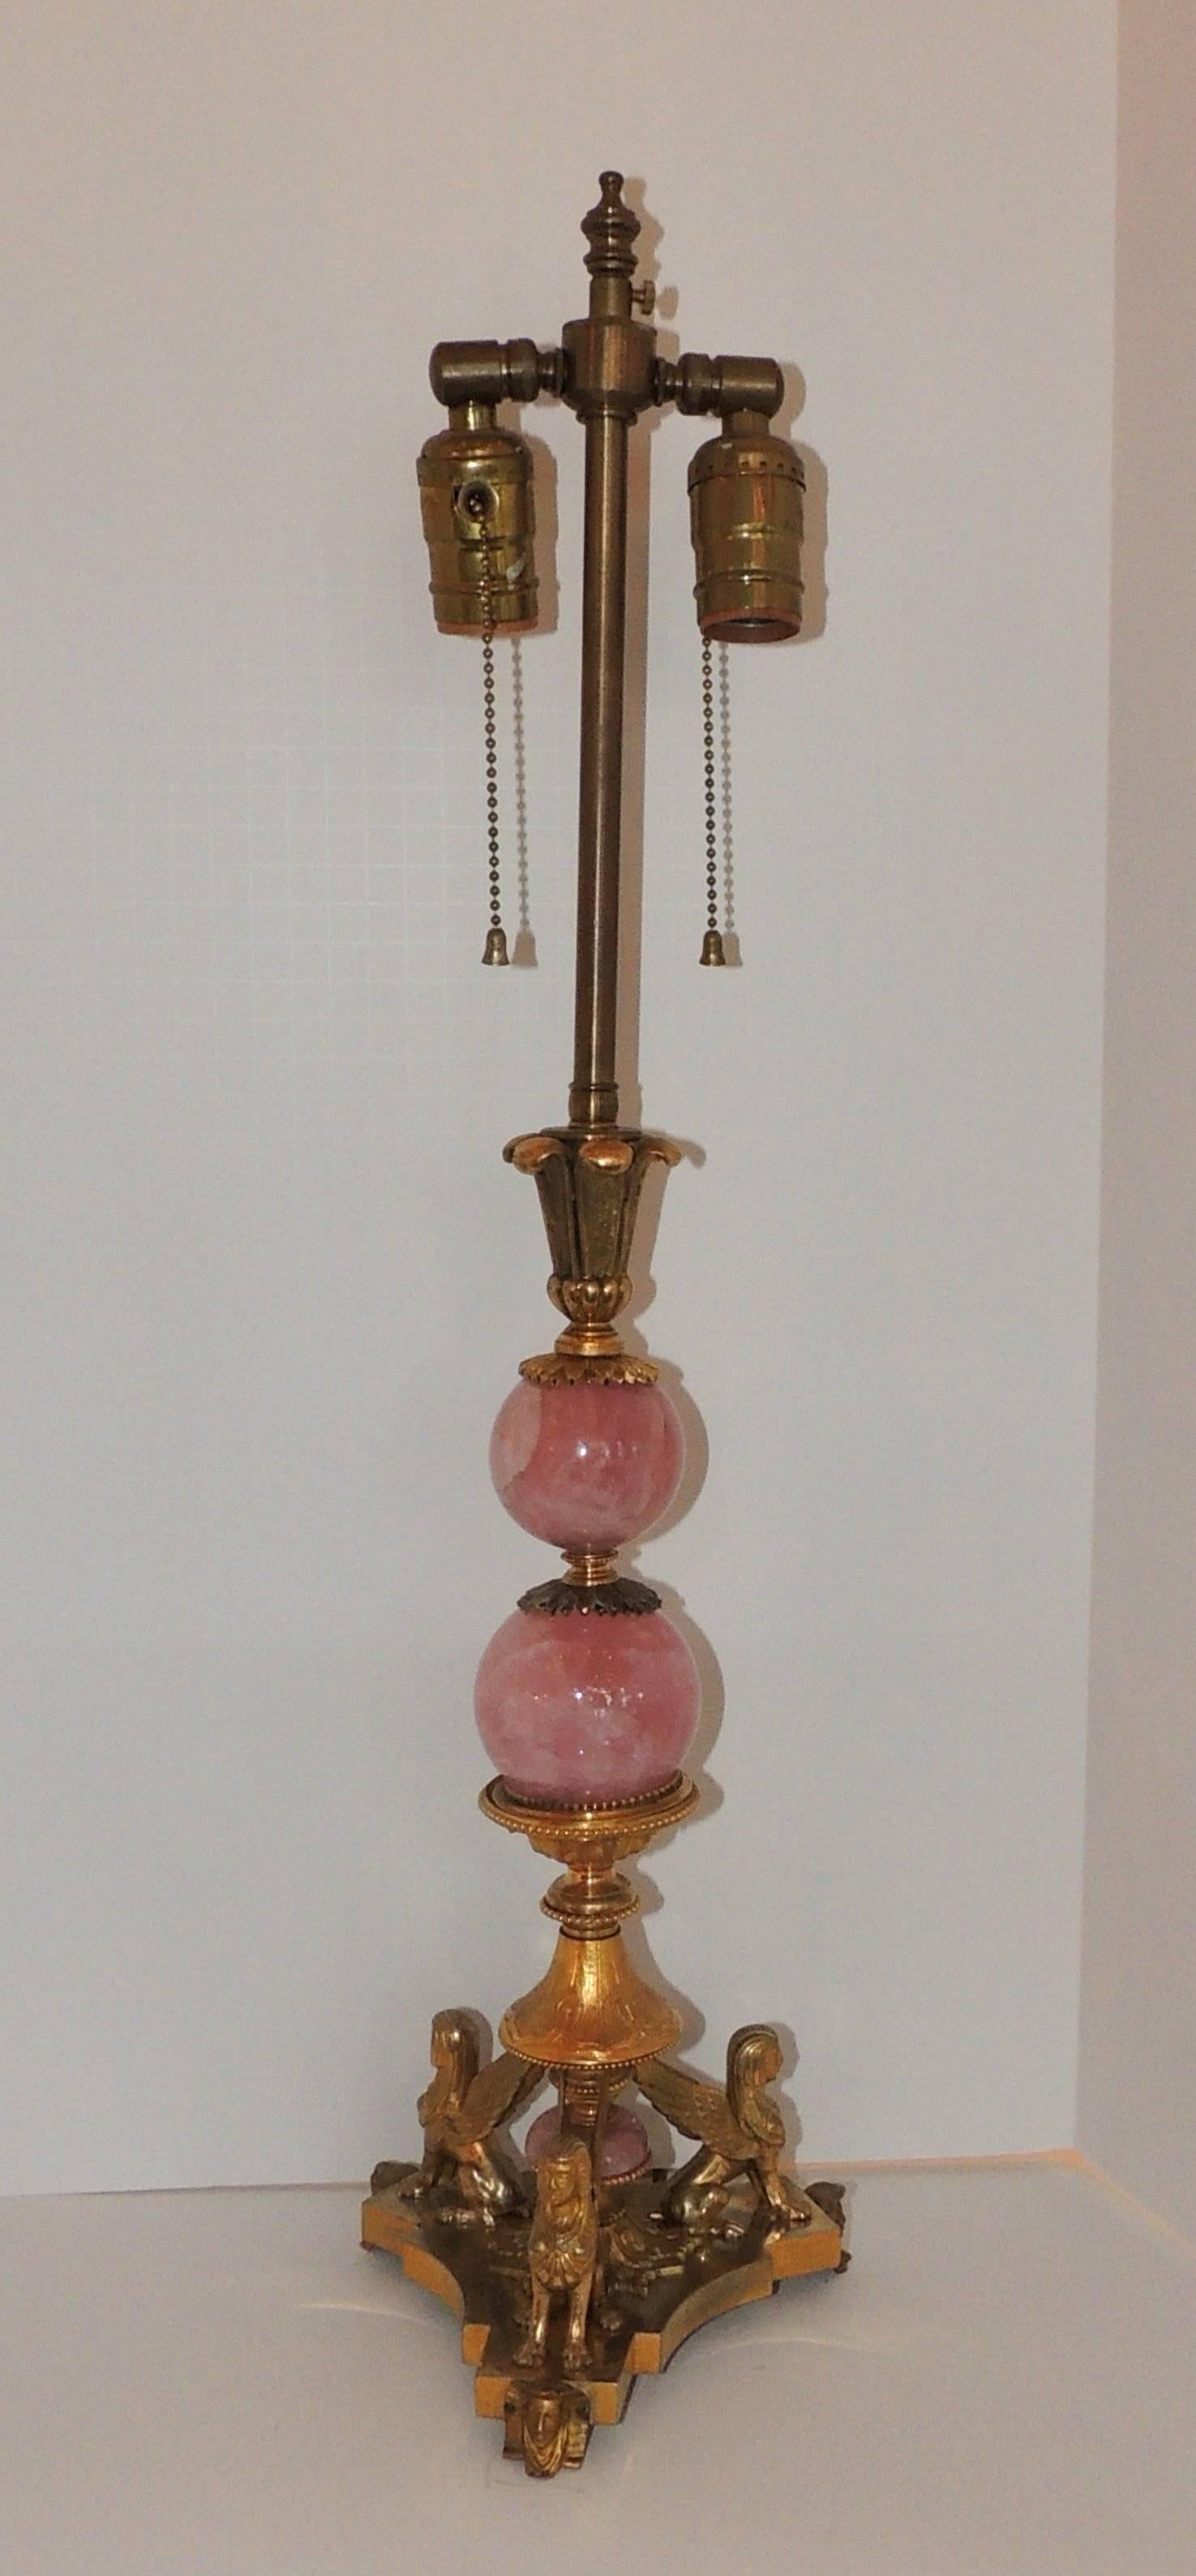 A wonderful French Regency Empire gilt bronze neoclassical rose quartz rock crystal lamp.
In the manner of E.F. Caldwell

Measures: 26